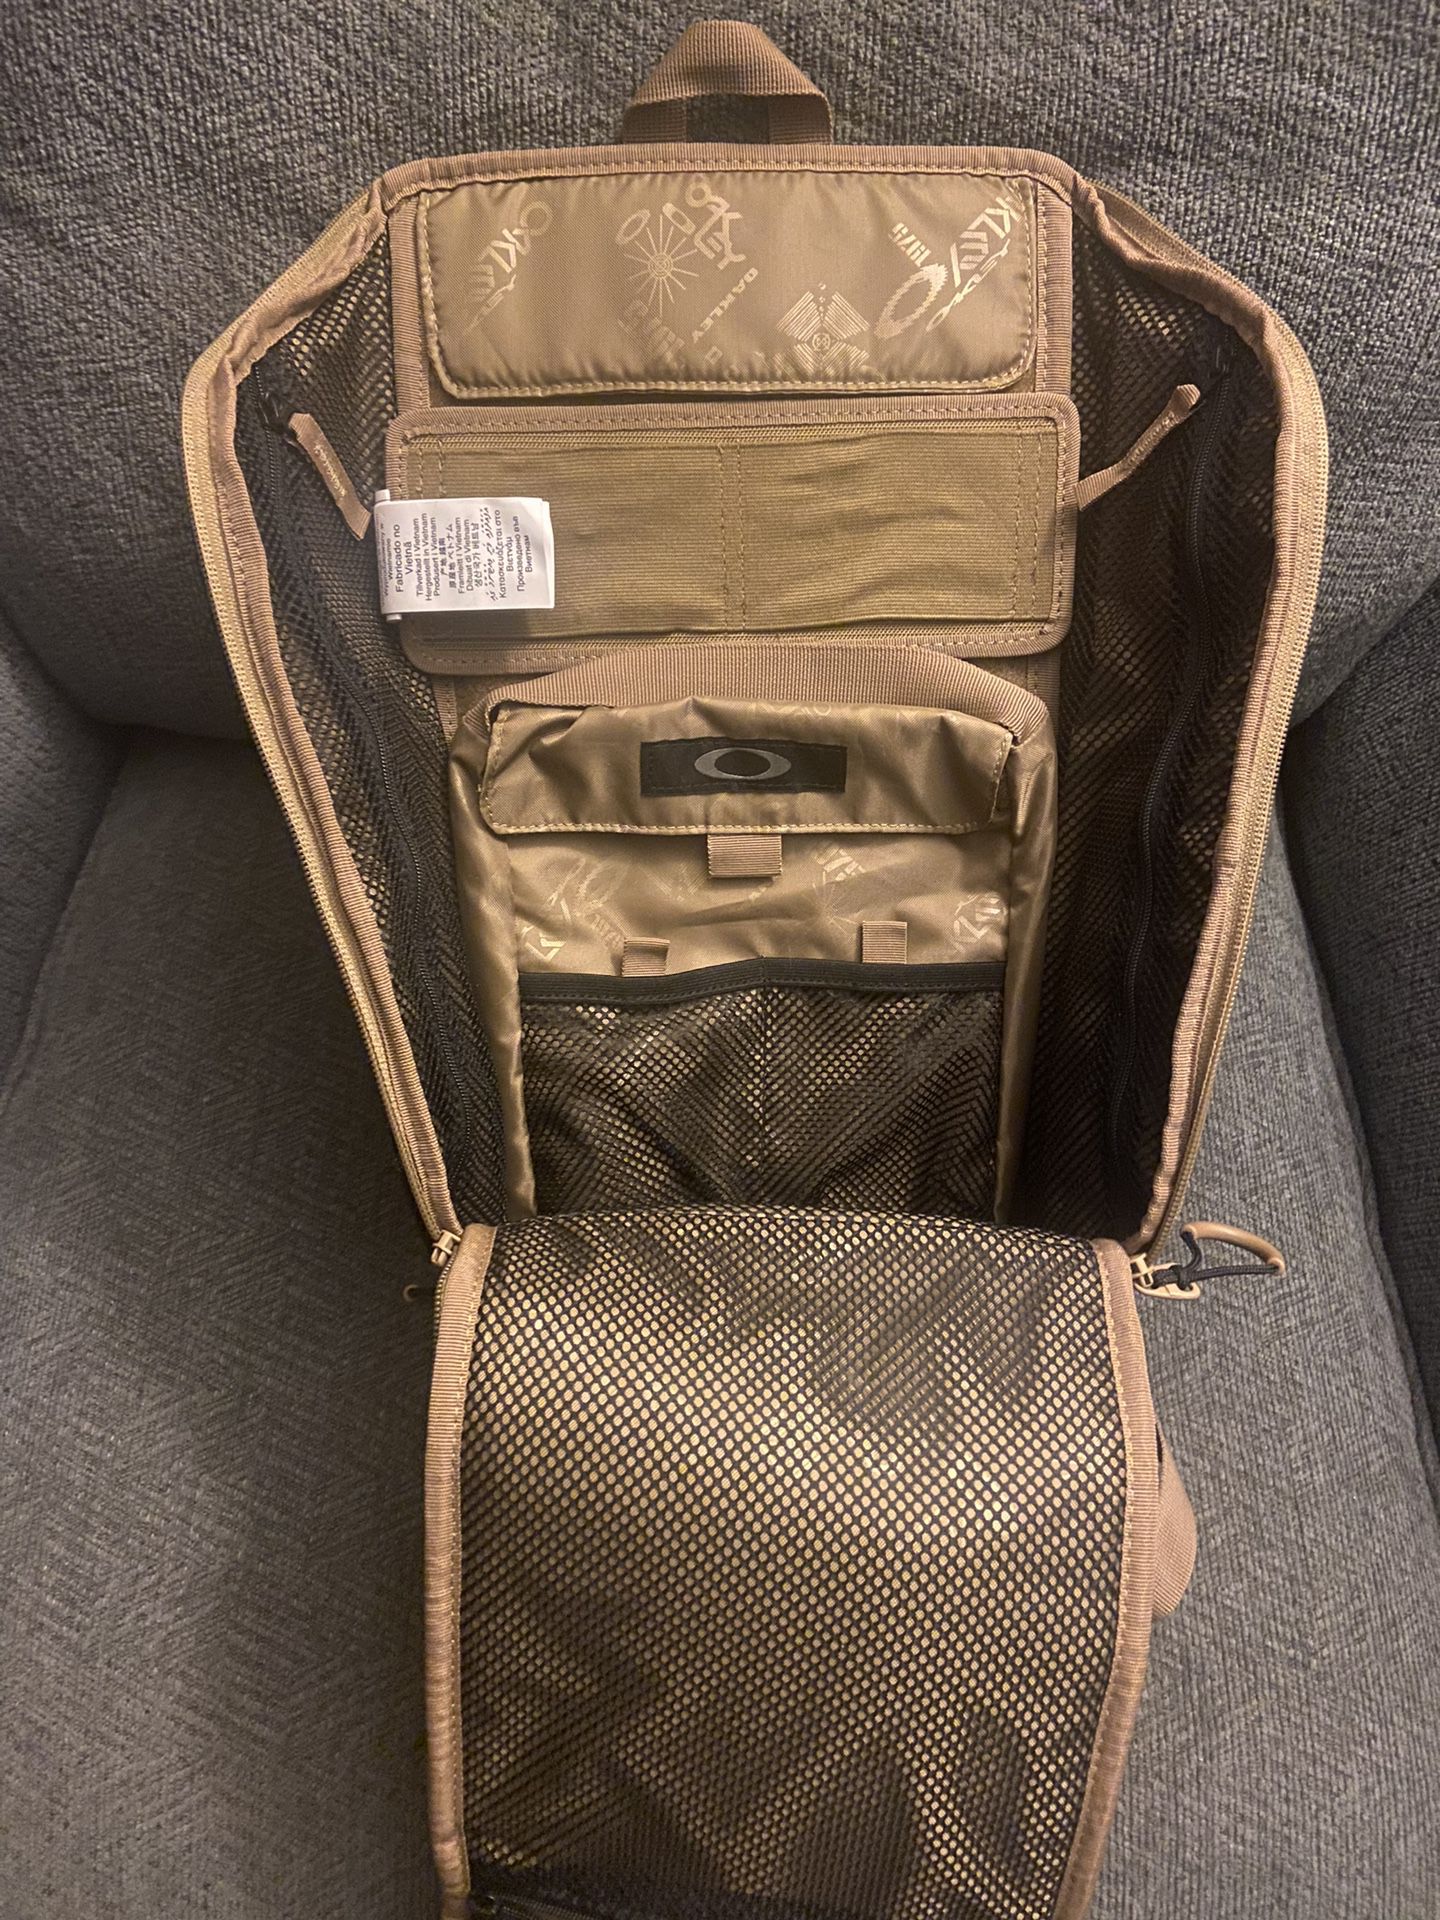 Oakley Extractor Sling Pack  for Sale in Corona, CA - OfferUp